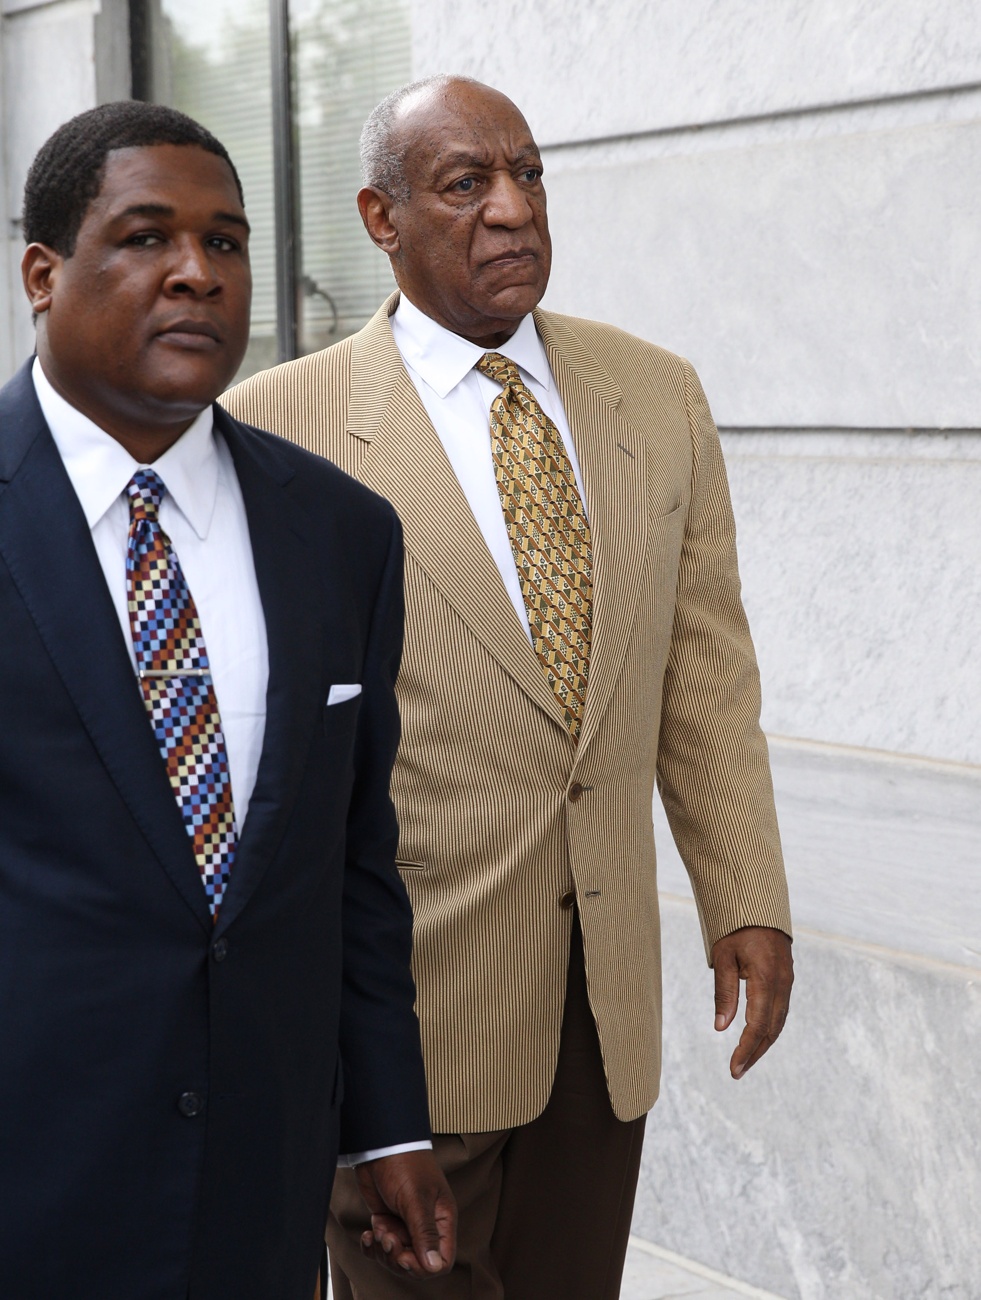 More than 60 women have denounced Bill Cosby